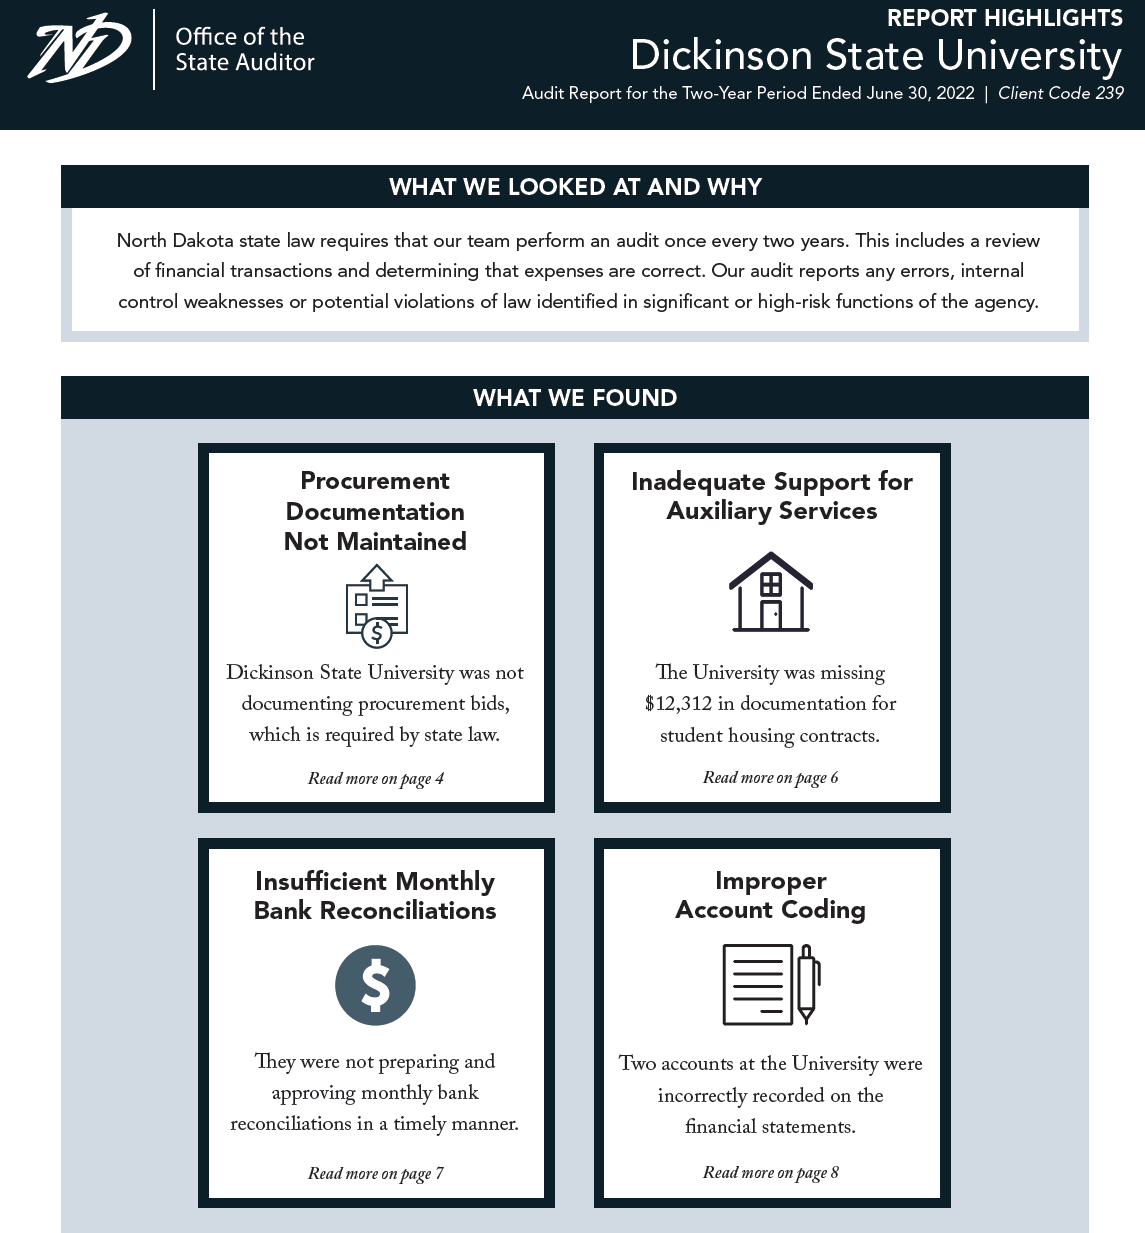 2022 Dickinson State University Report Highlights